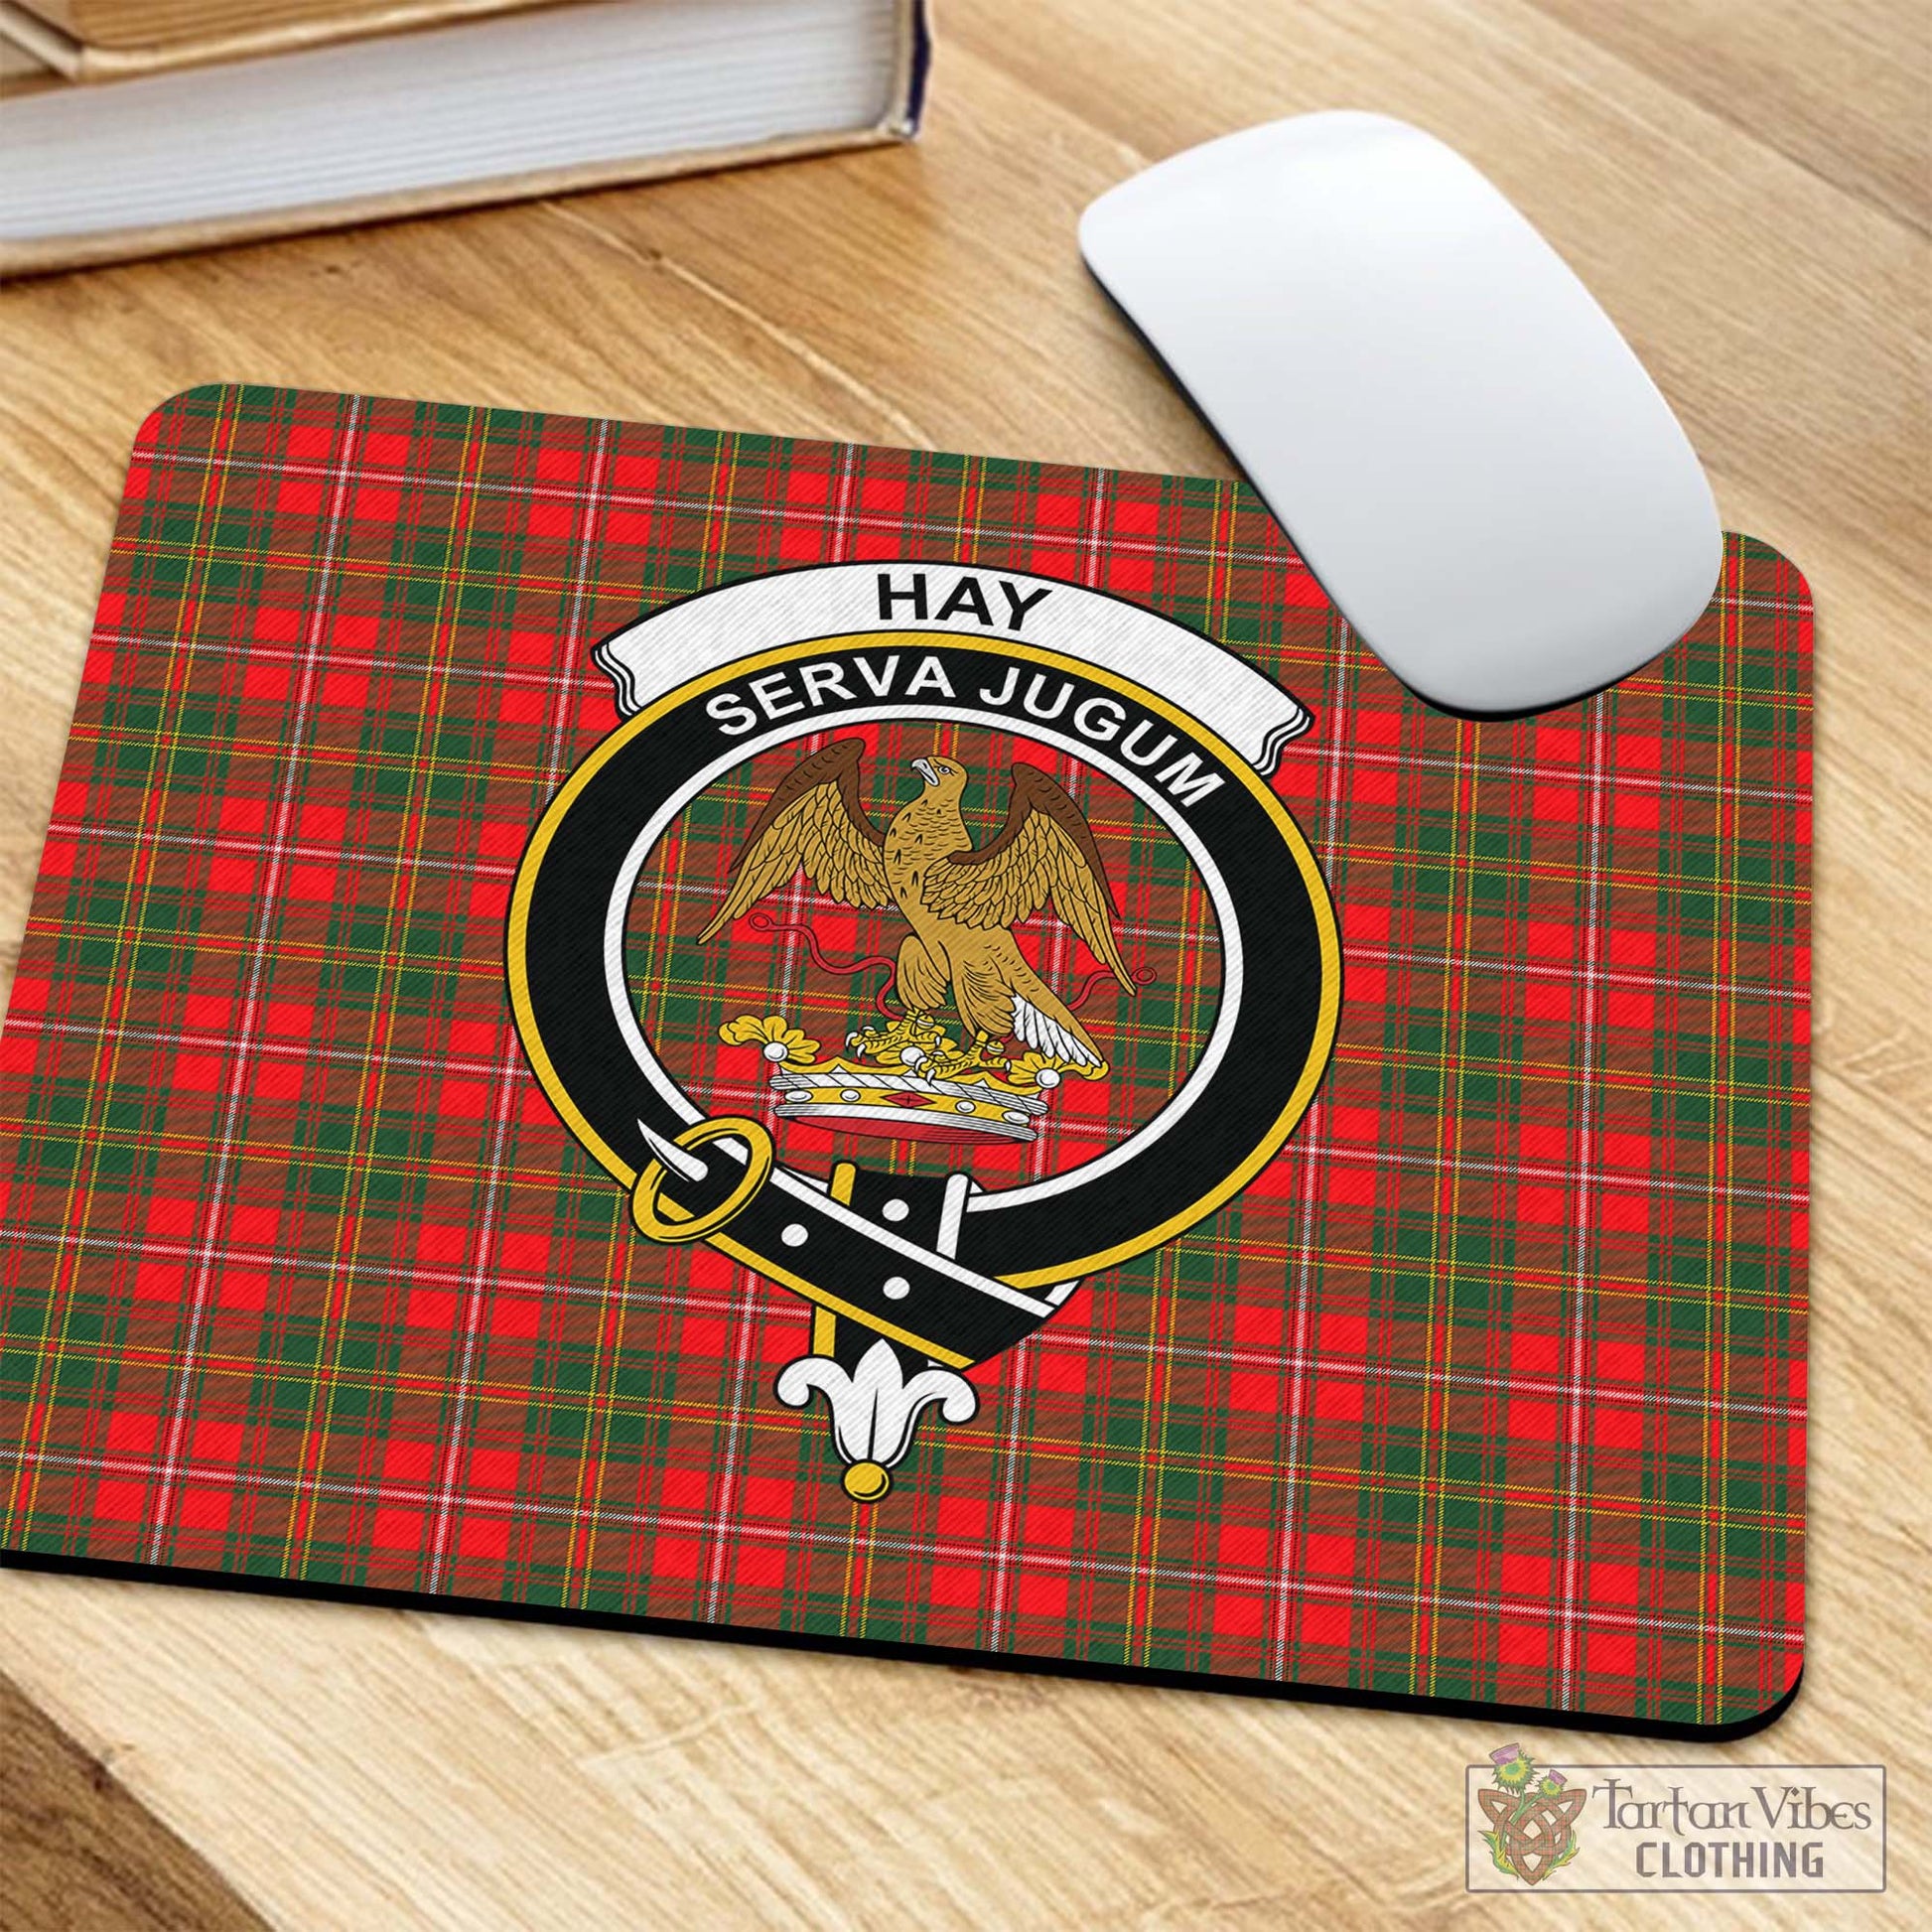 Tartan Vibes Clothing Hay Modern Tartan Mouse Pad with Family Crest